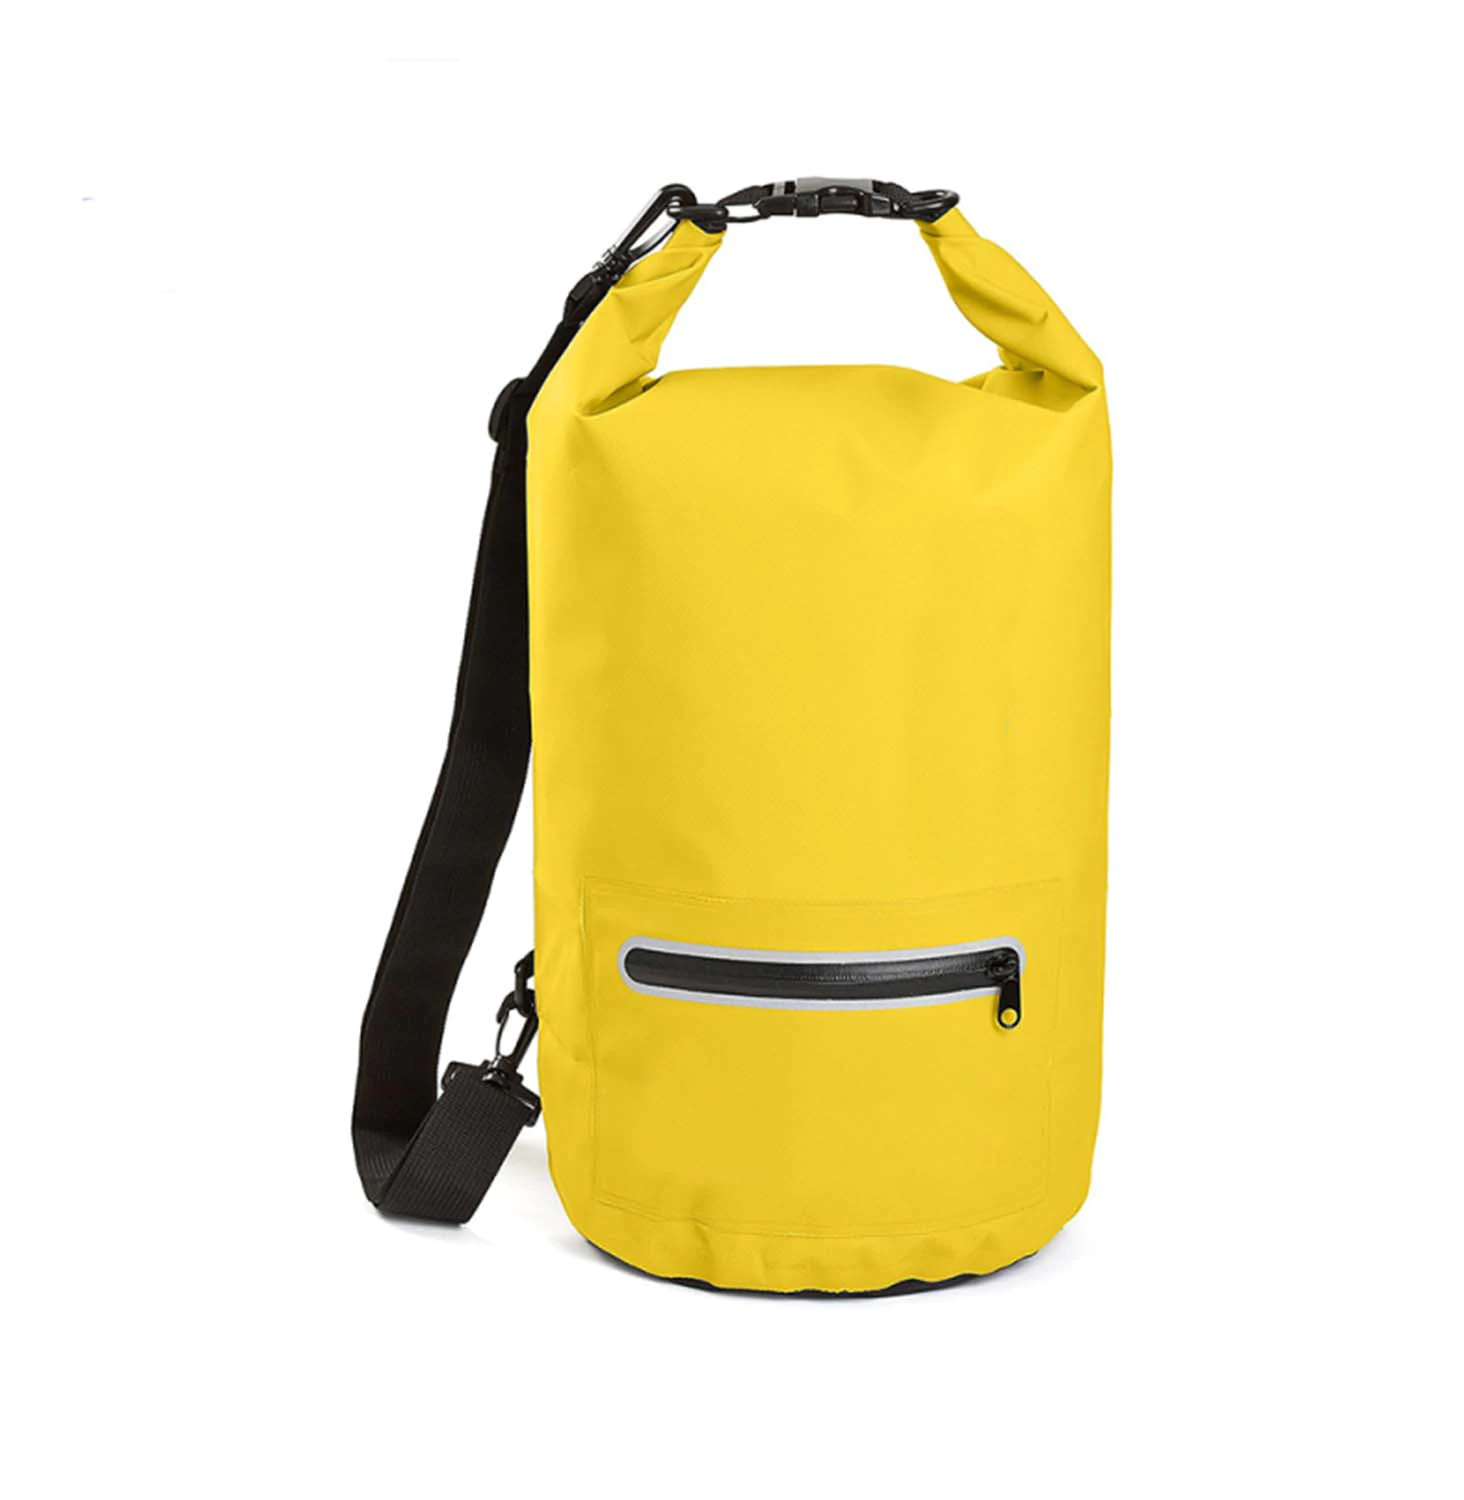 outdoor dry bag with innovative transparent window design for rafting